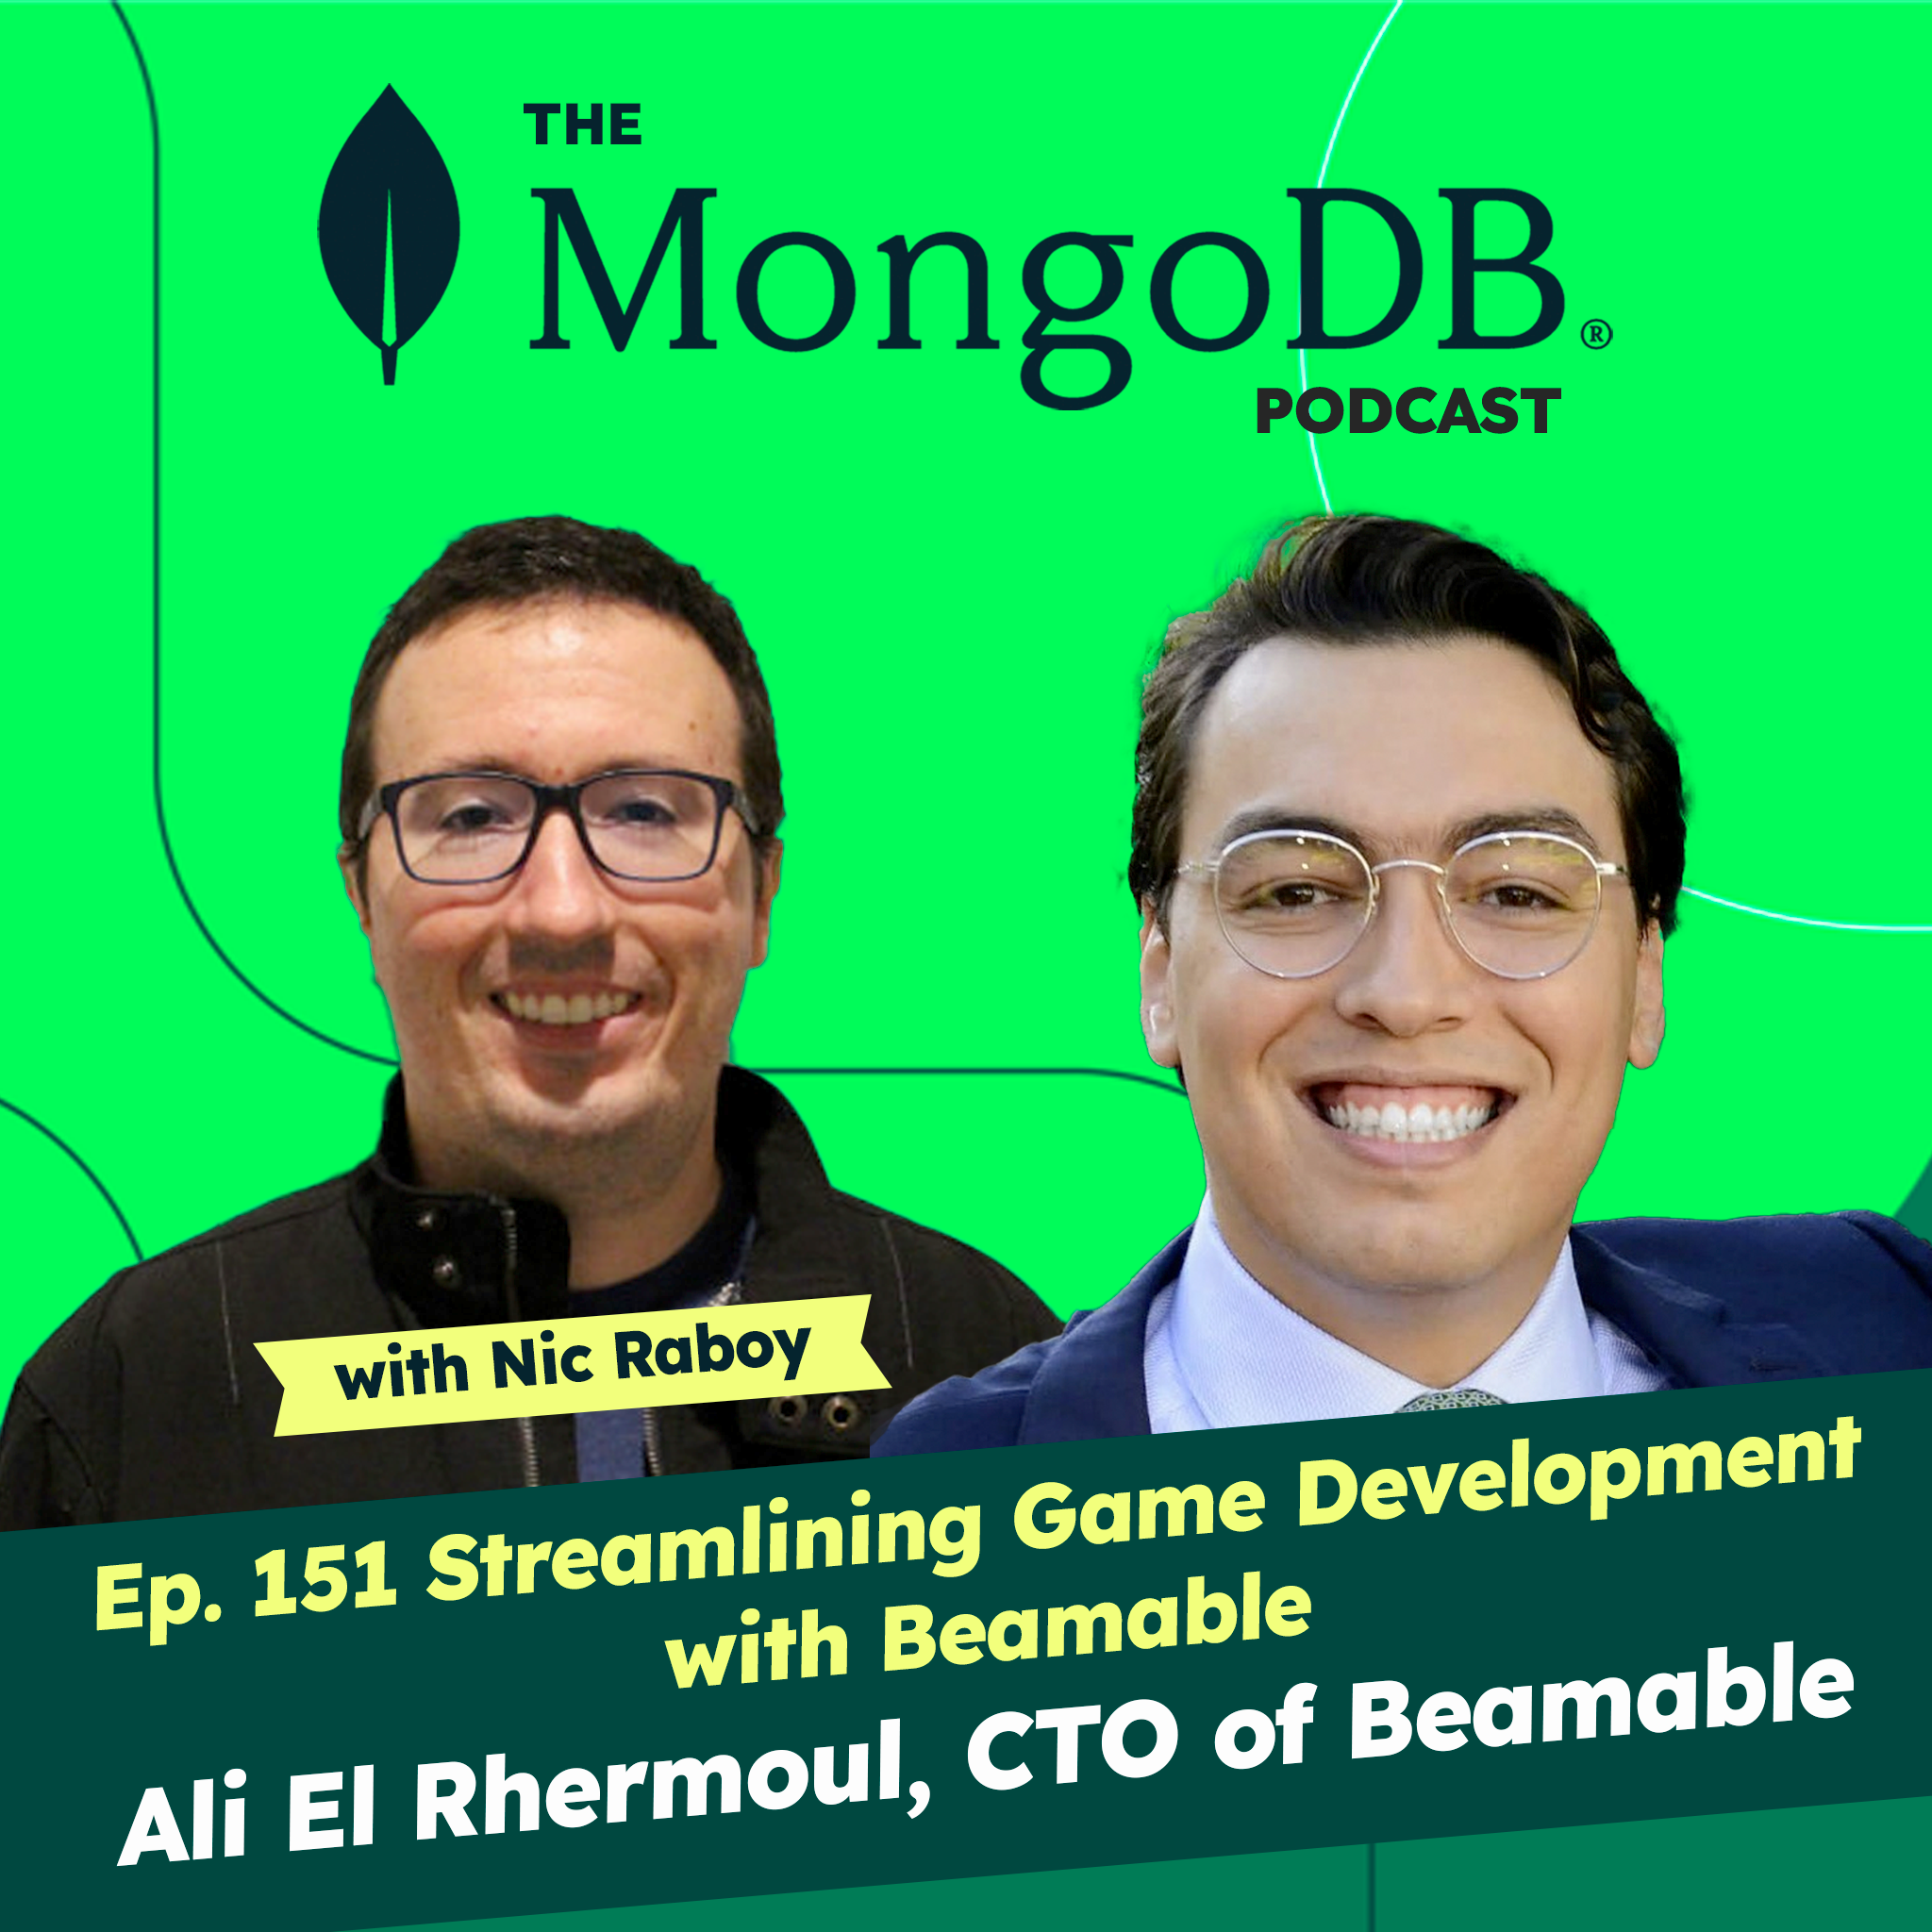 Ep. 151 Streamlining Game Development with Beamable CTO Ali El Rhermoul: Insights and Strategies for Game Developers